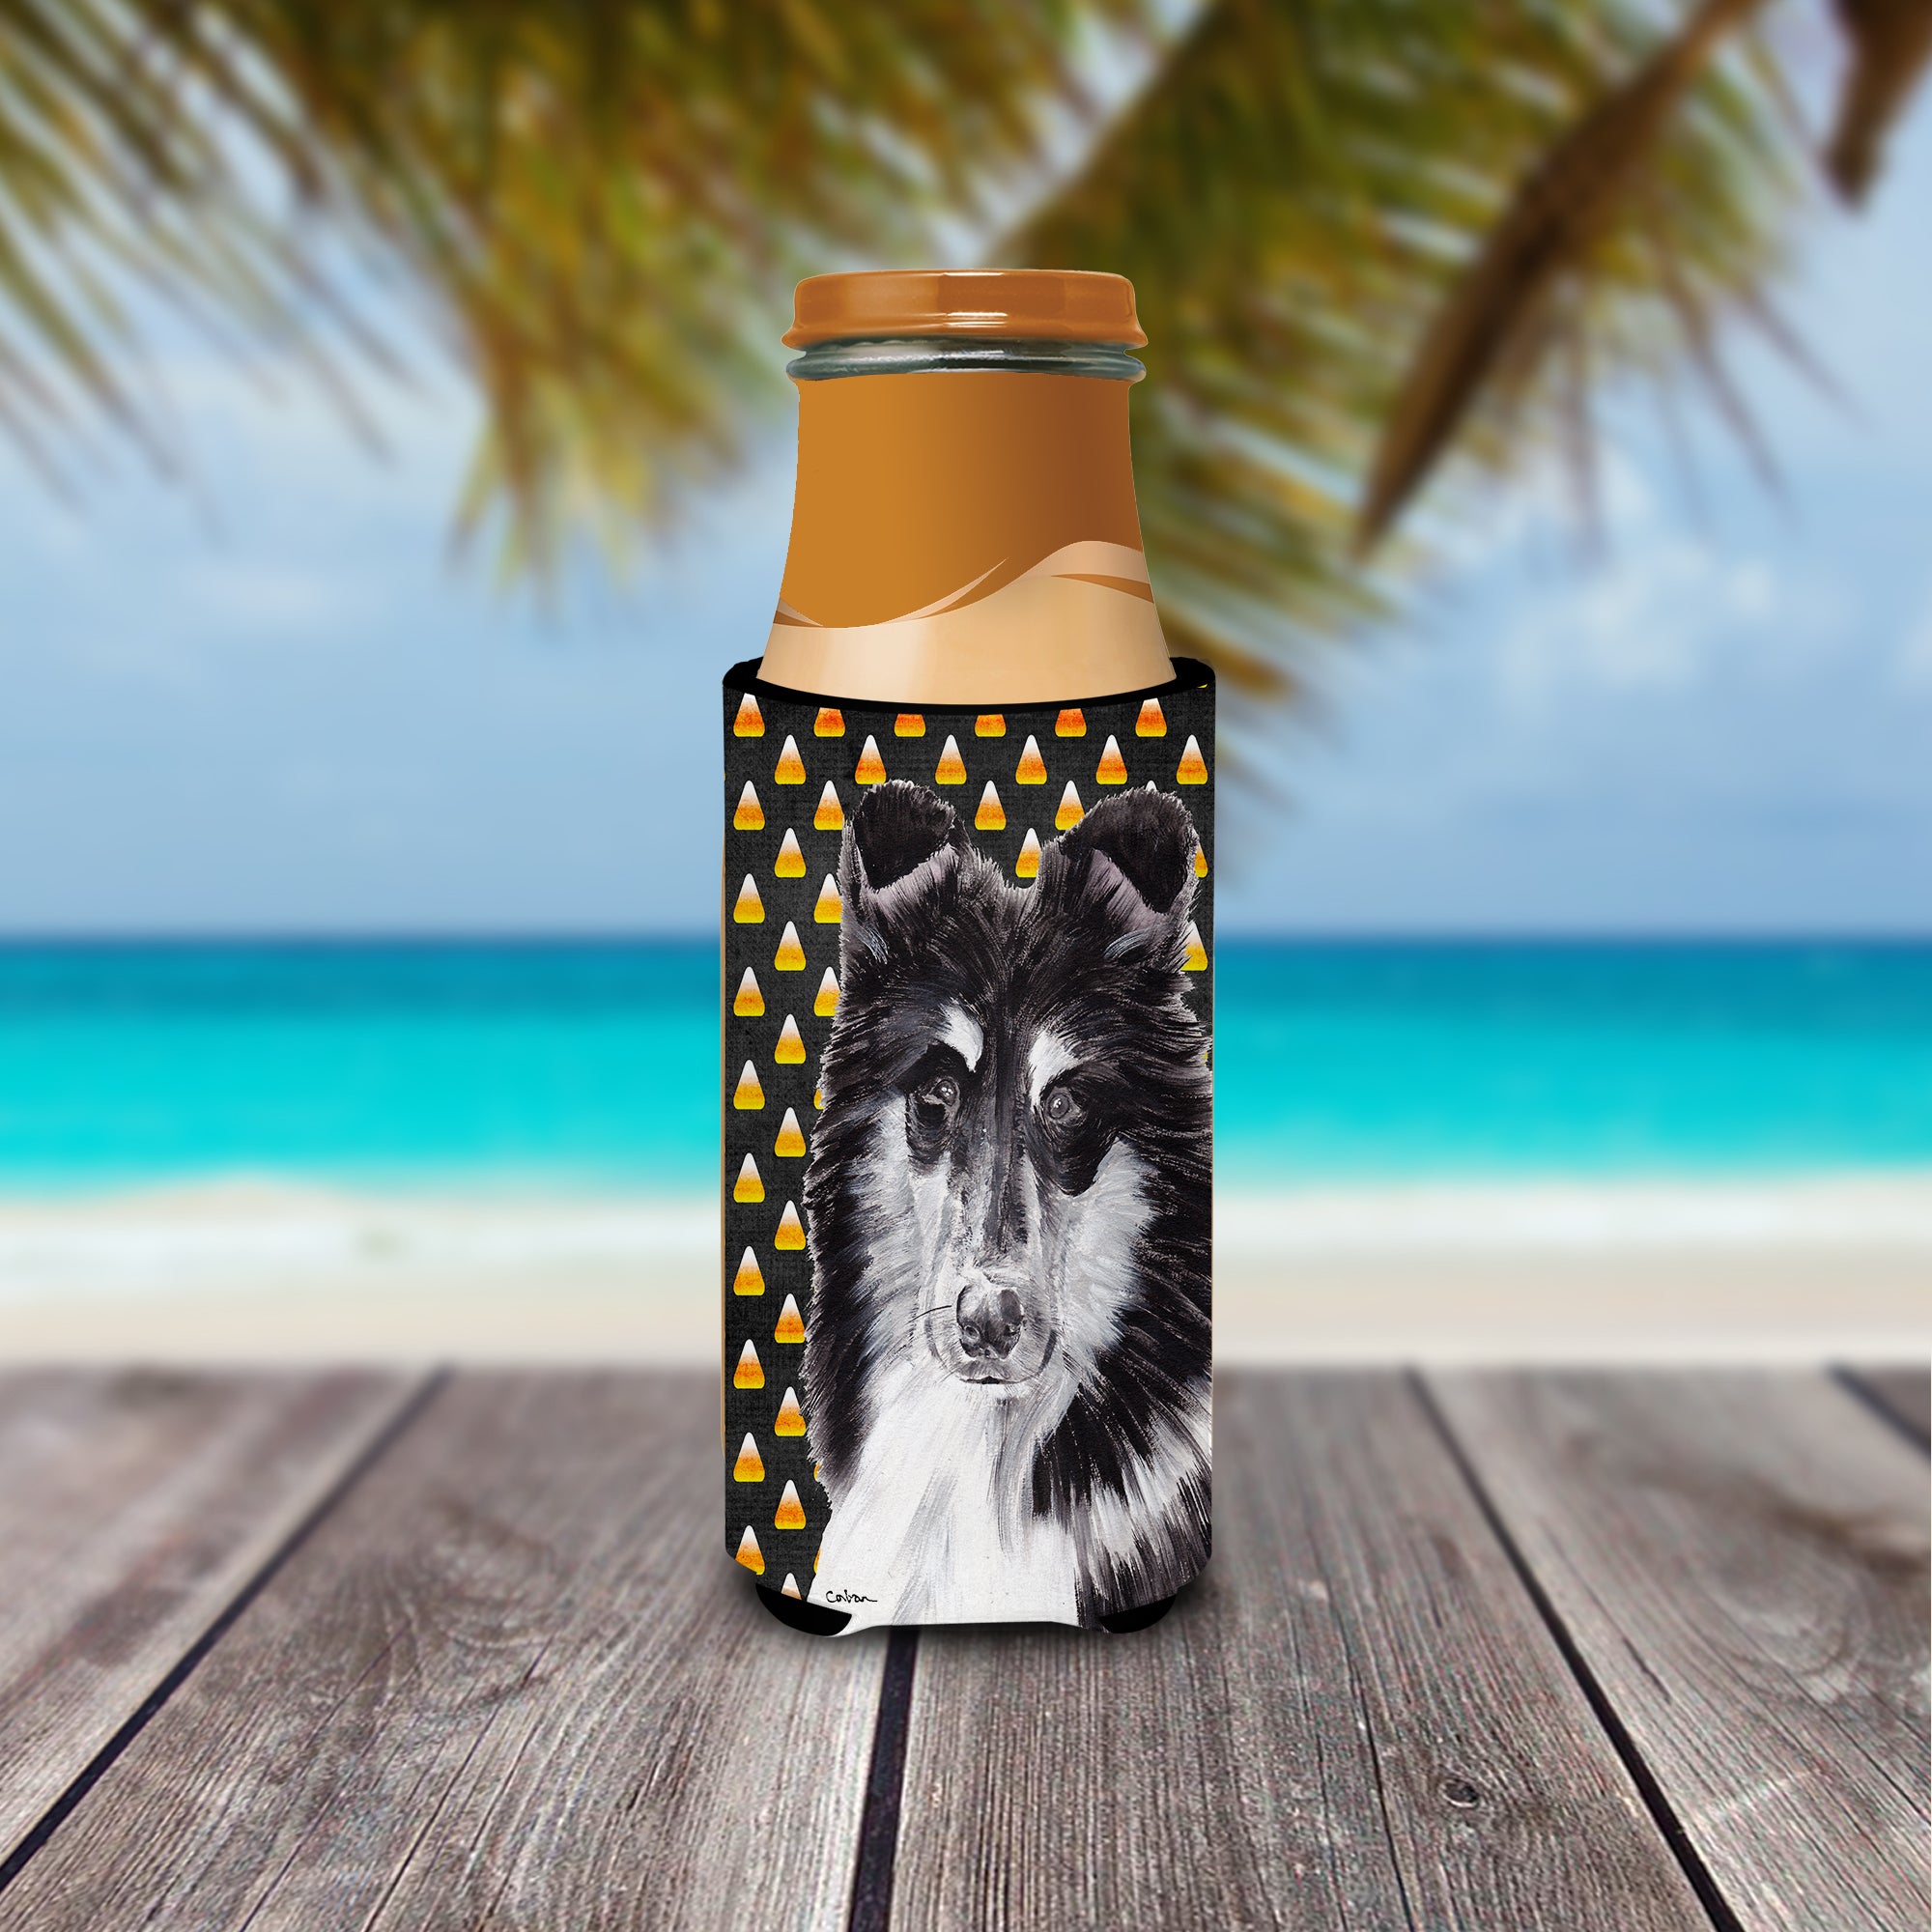 Black and White Collie Candy Corn Halloween Ultra Beverage Insulators for slim cans SC9654MUK.